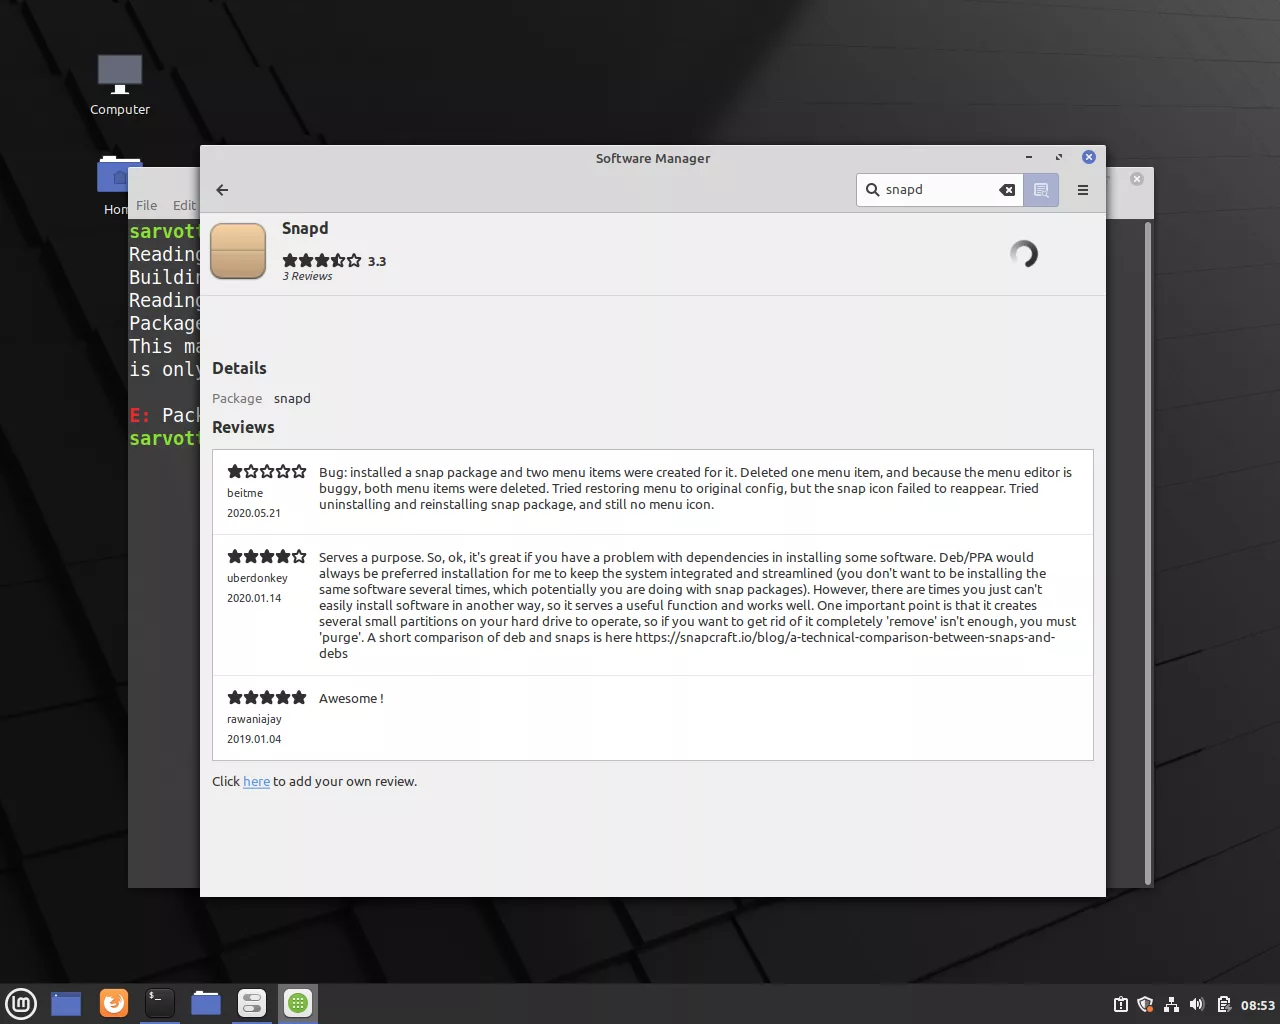 How To Enable Snap And Install Snap Packages On Linux Mint 20?